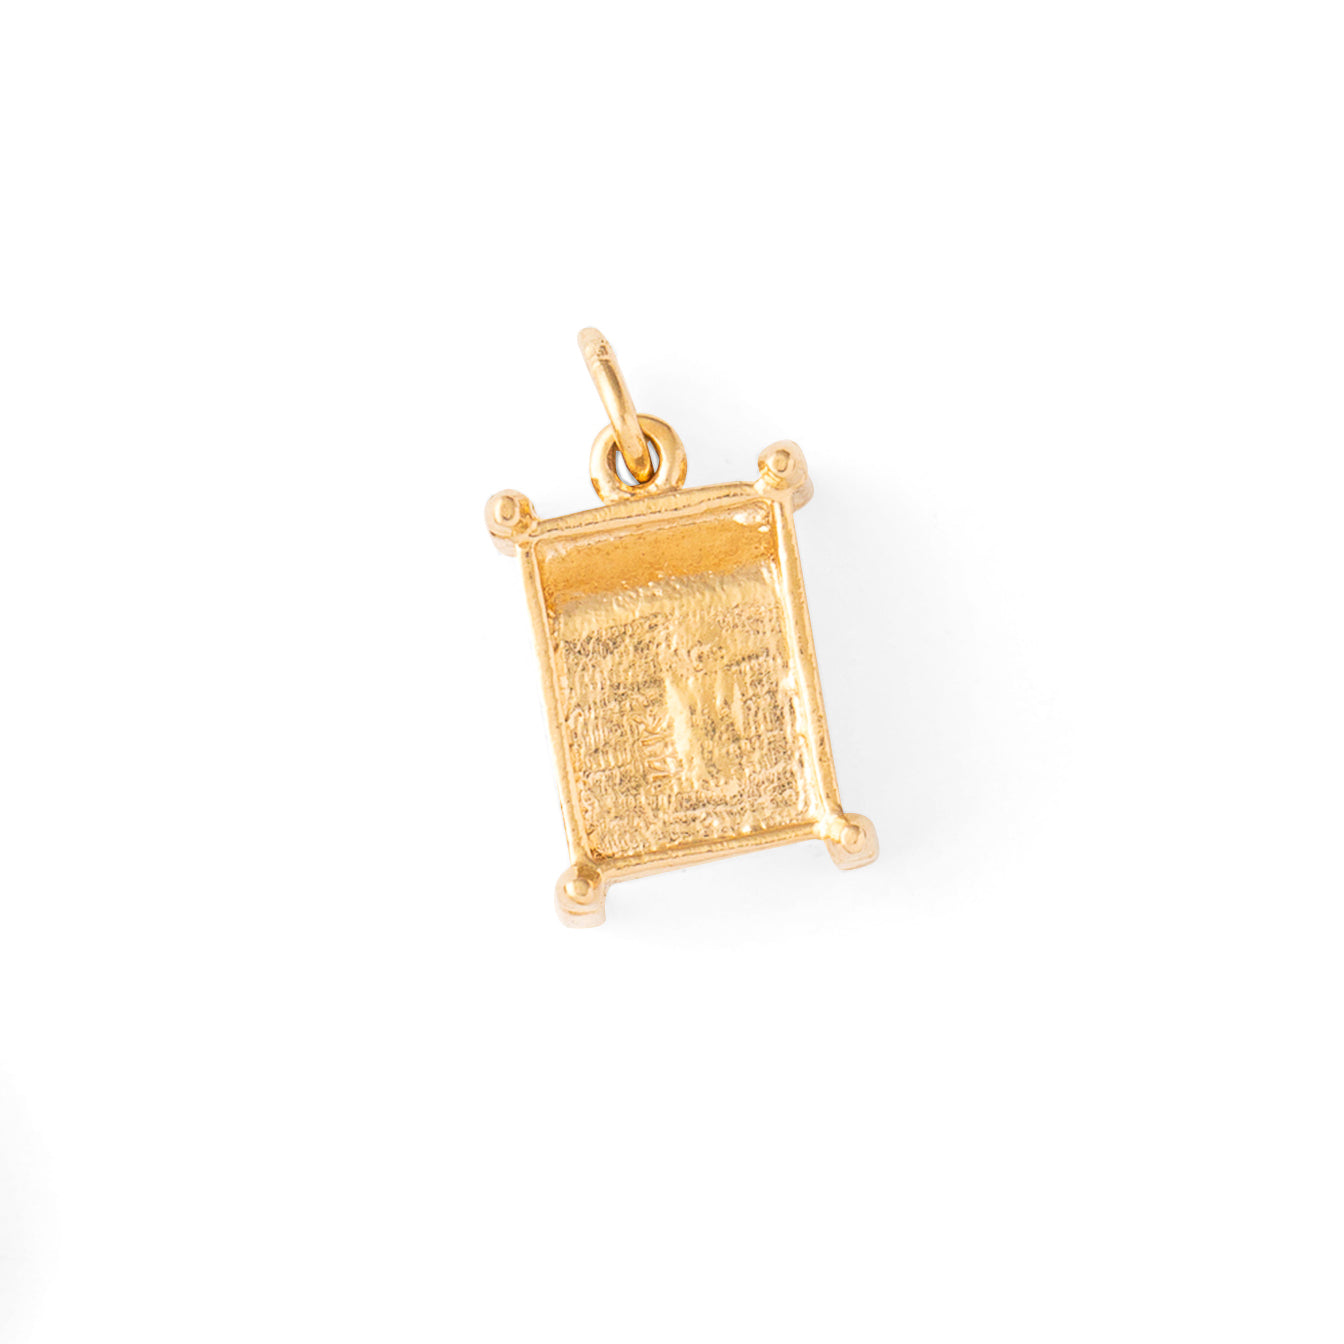 Enamel and 14k Gold Bed Charm